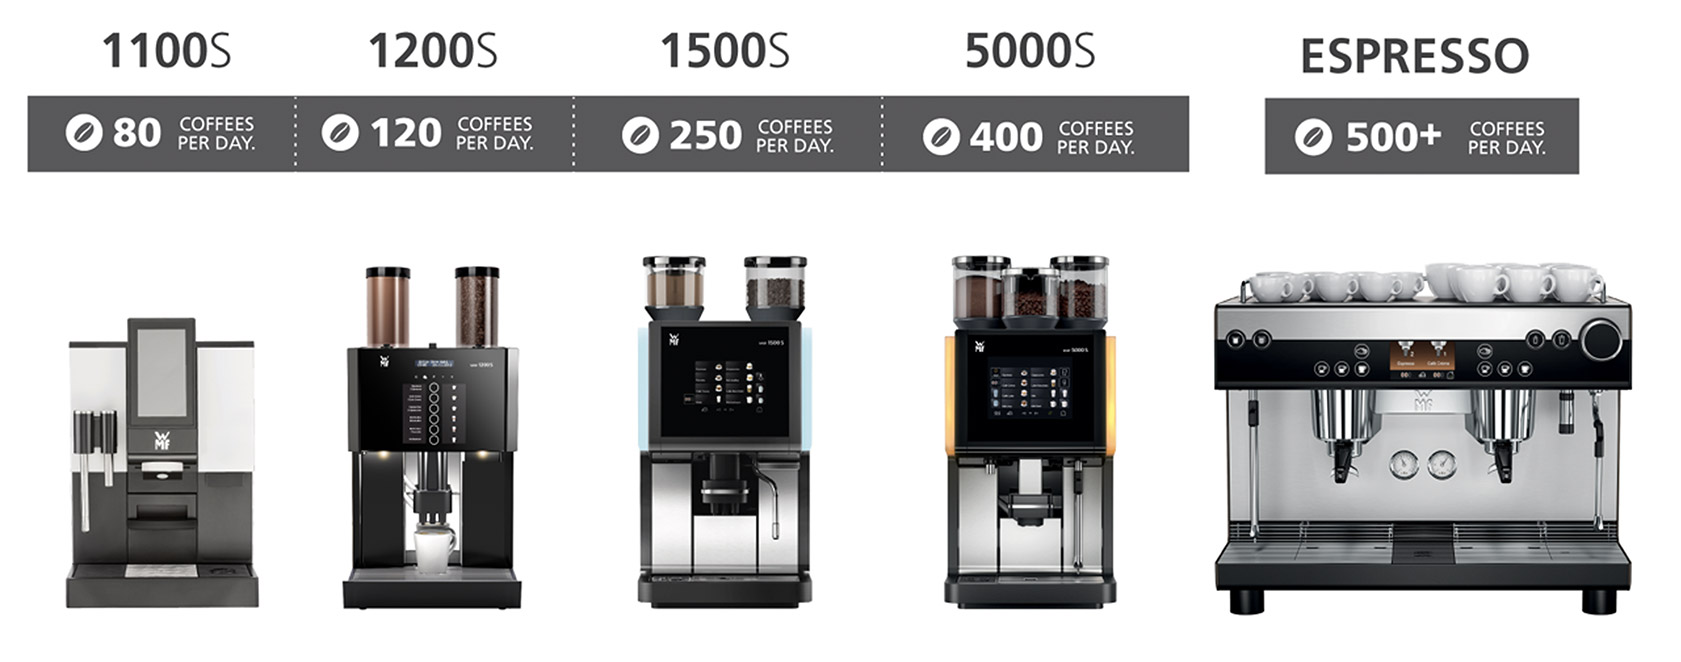 History of the Coffee Machines